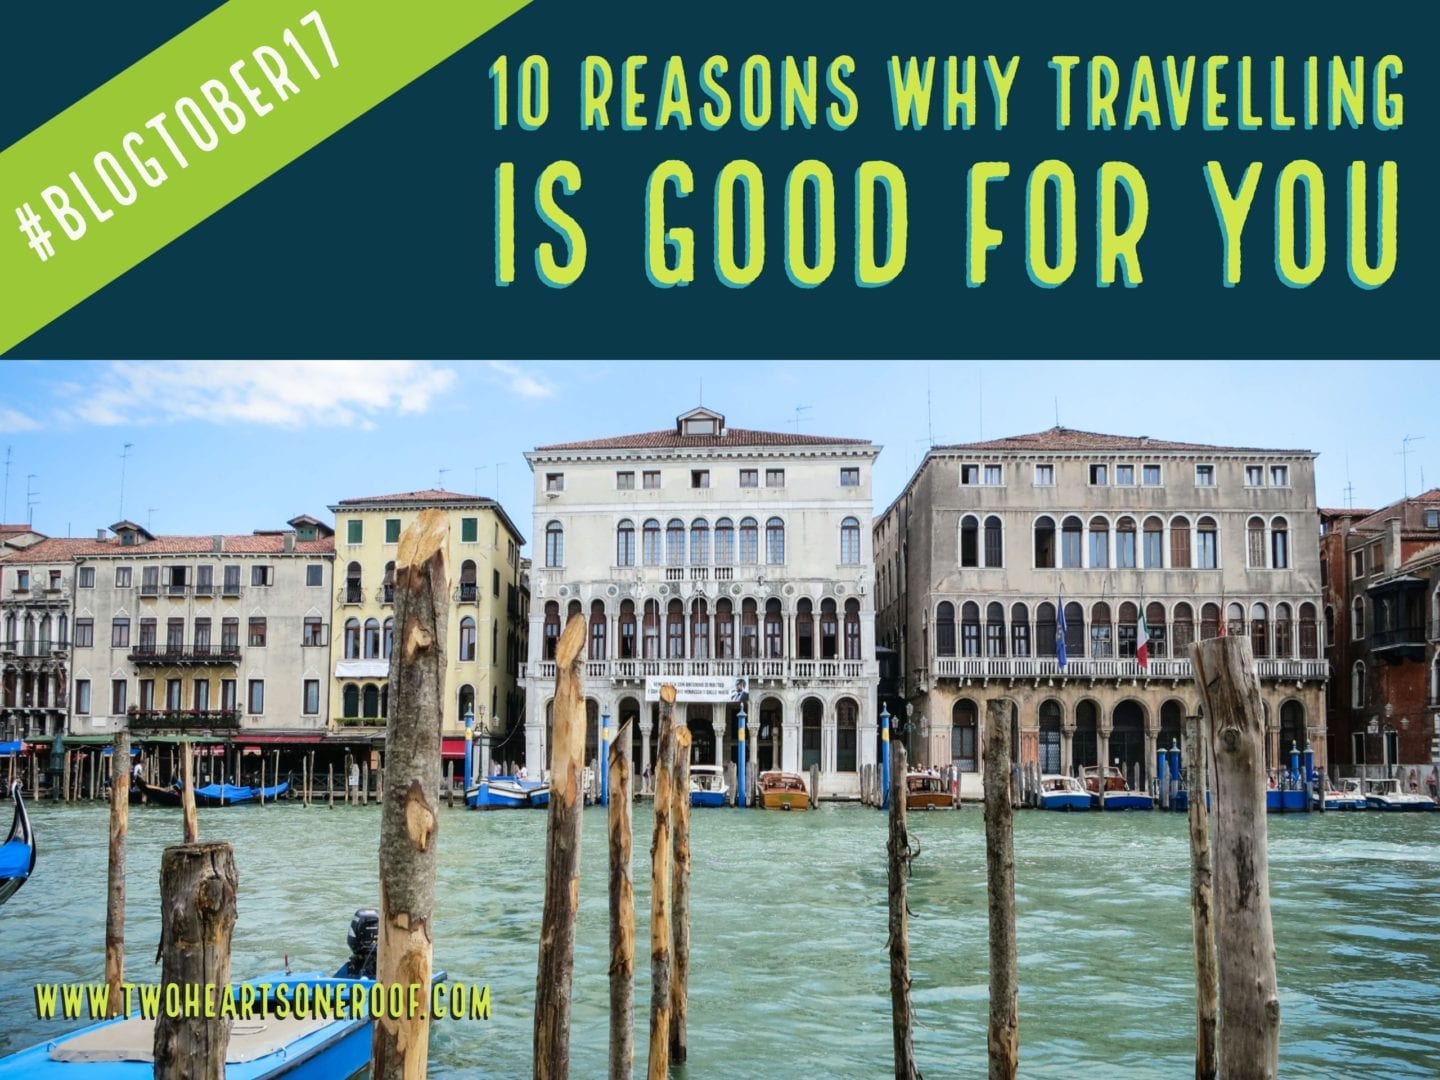 10 Reasons Why Travelling Is Good For You – Blogtober 17